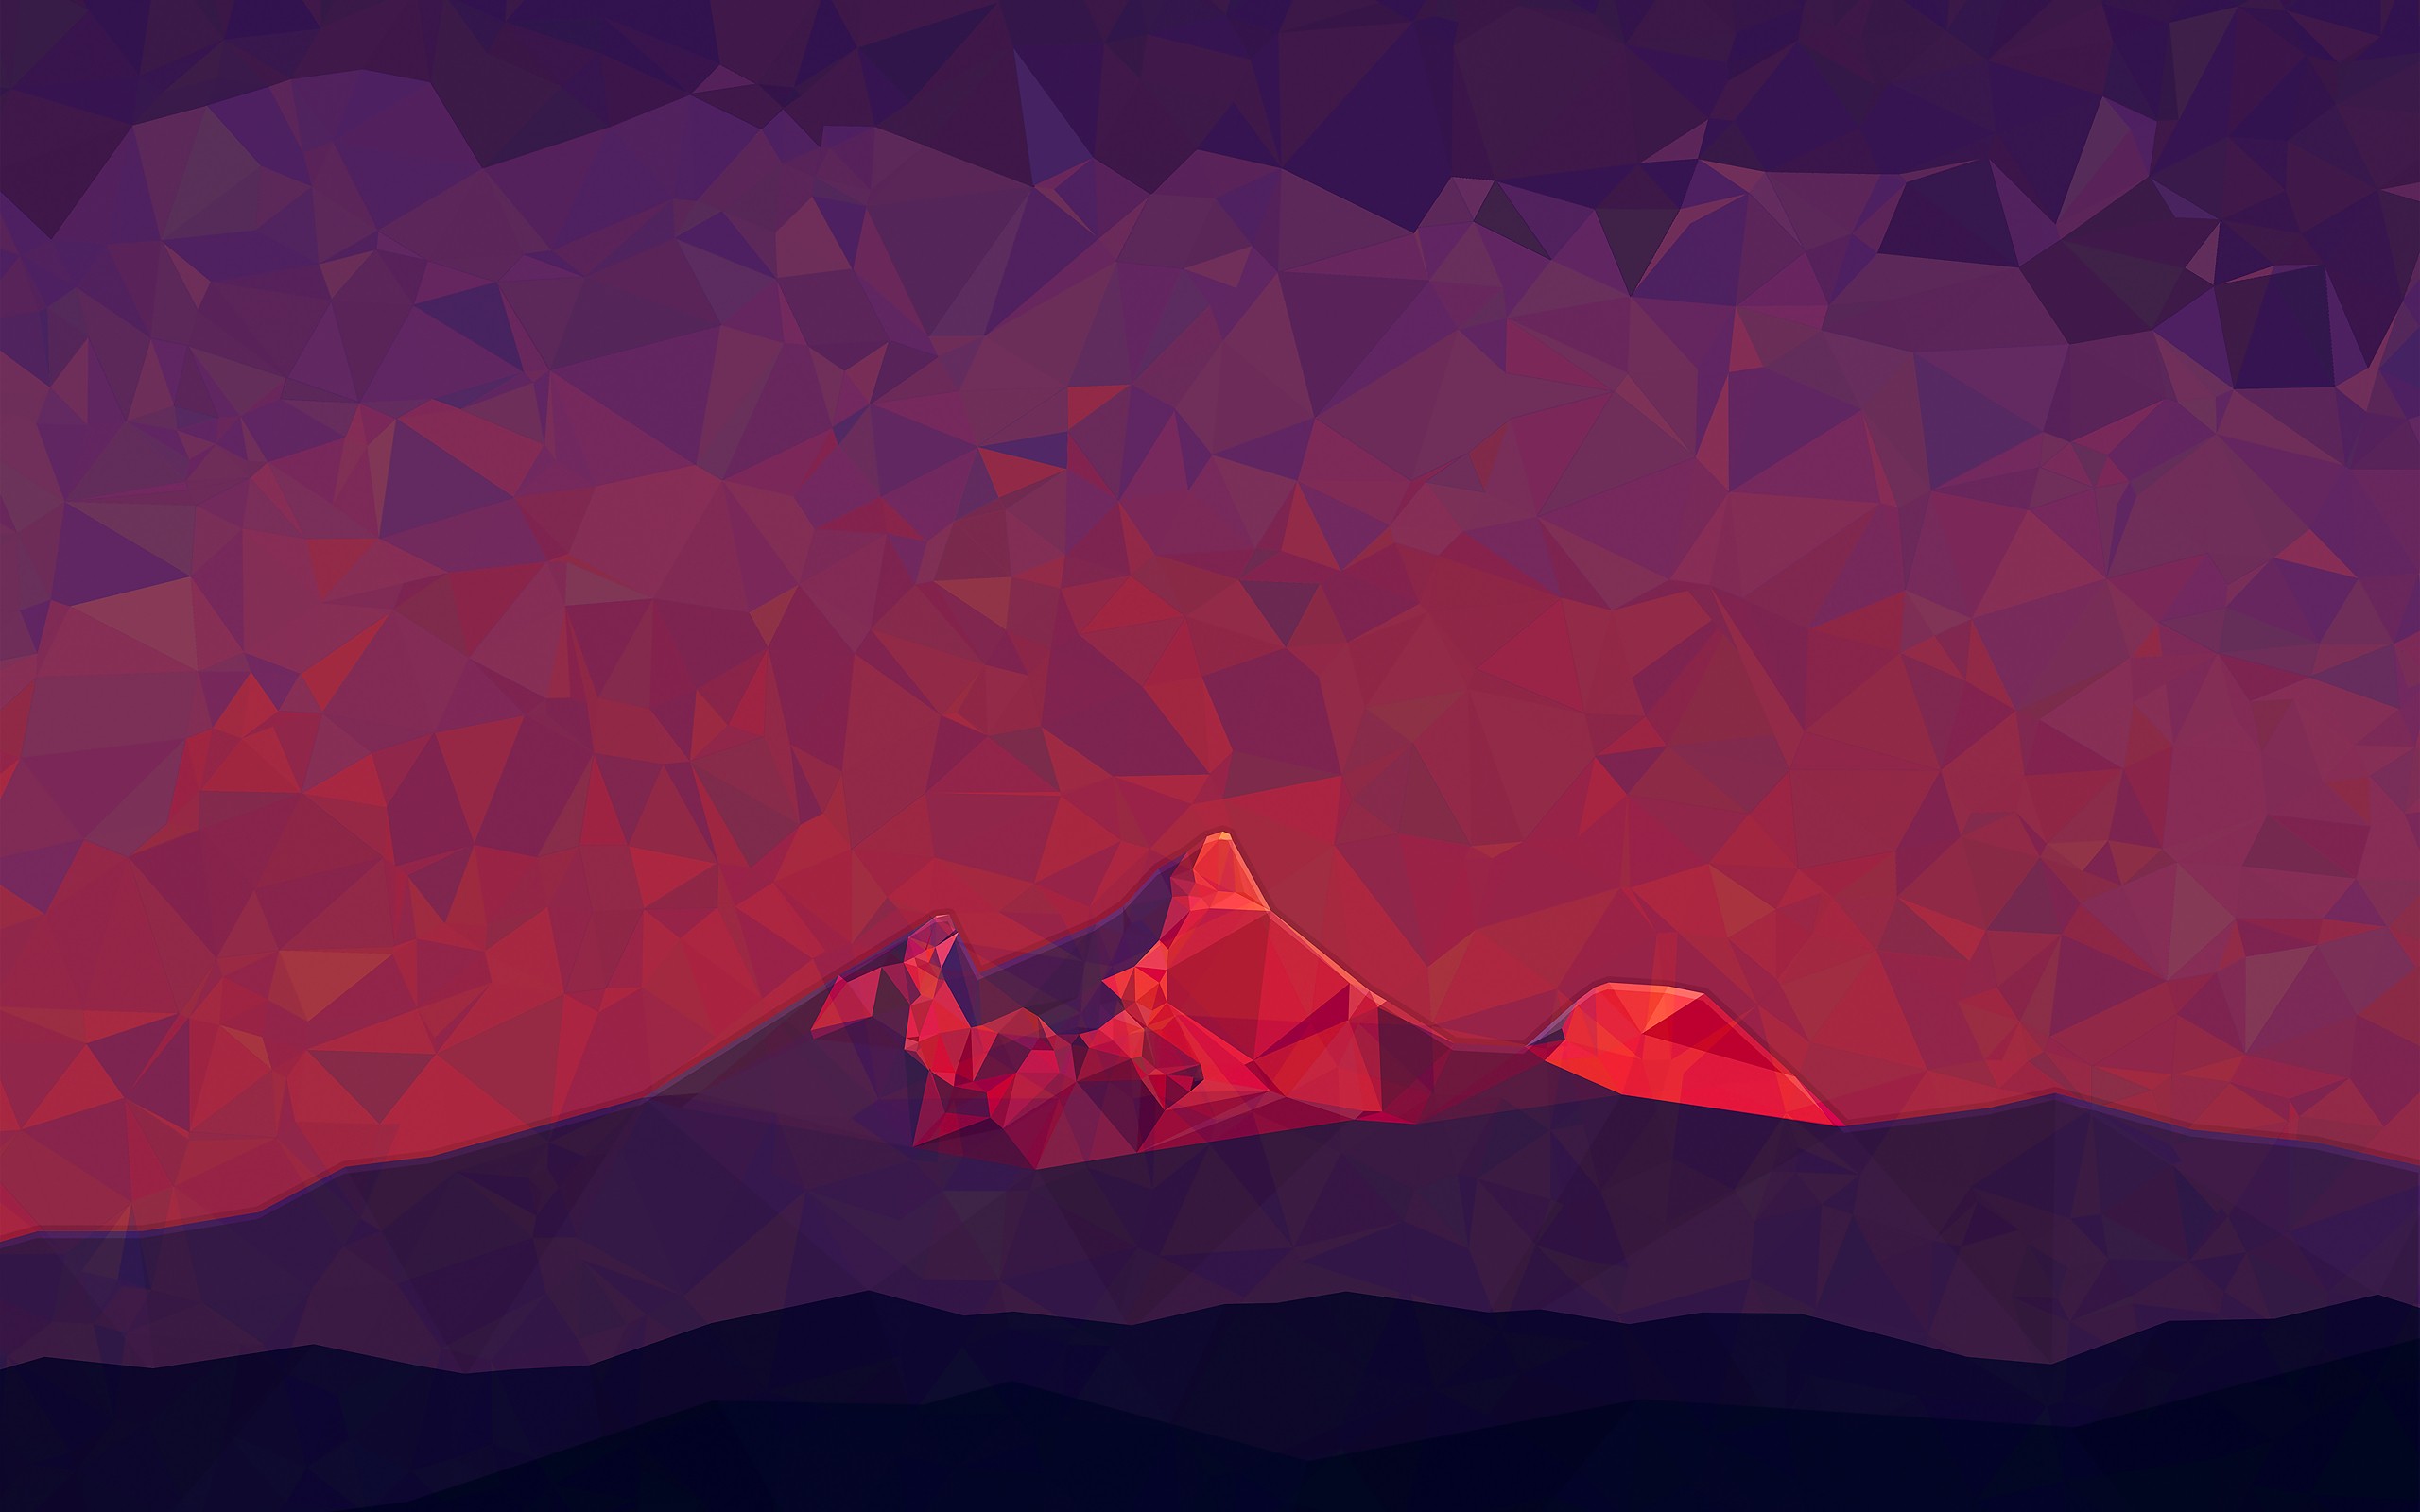 General 2560x1600 low poly mountains abstract poly digital art nature sky red